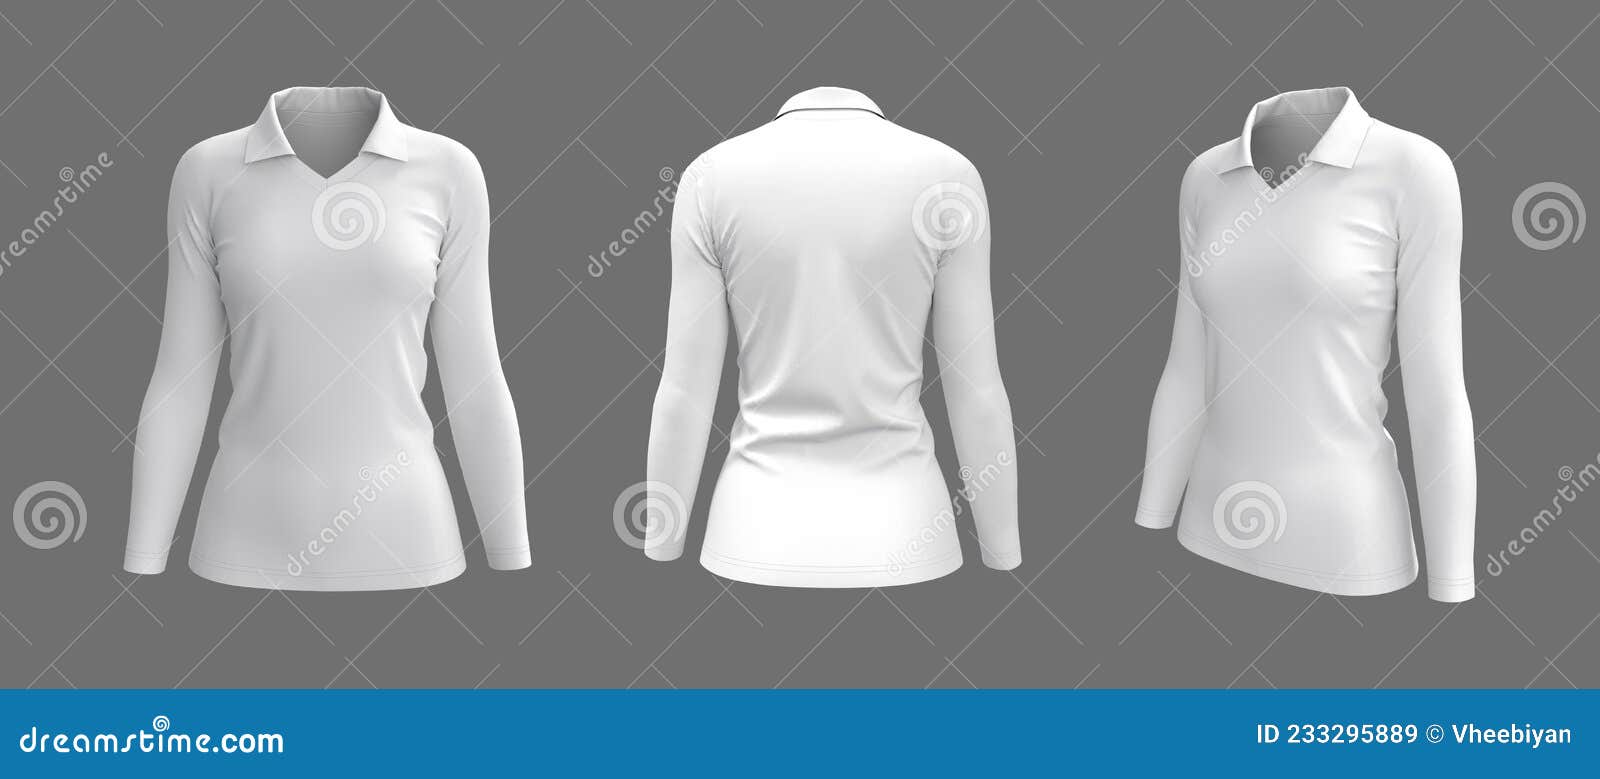 Women`s Collared T-shirt Mockup, Front, Side and Back Views Stock ...